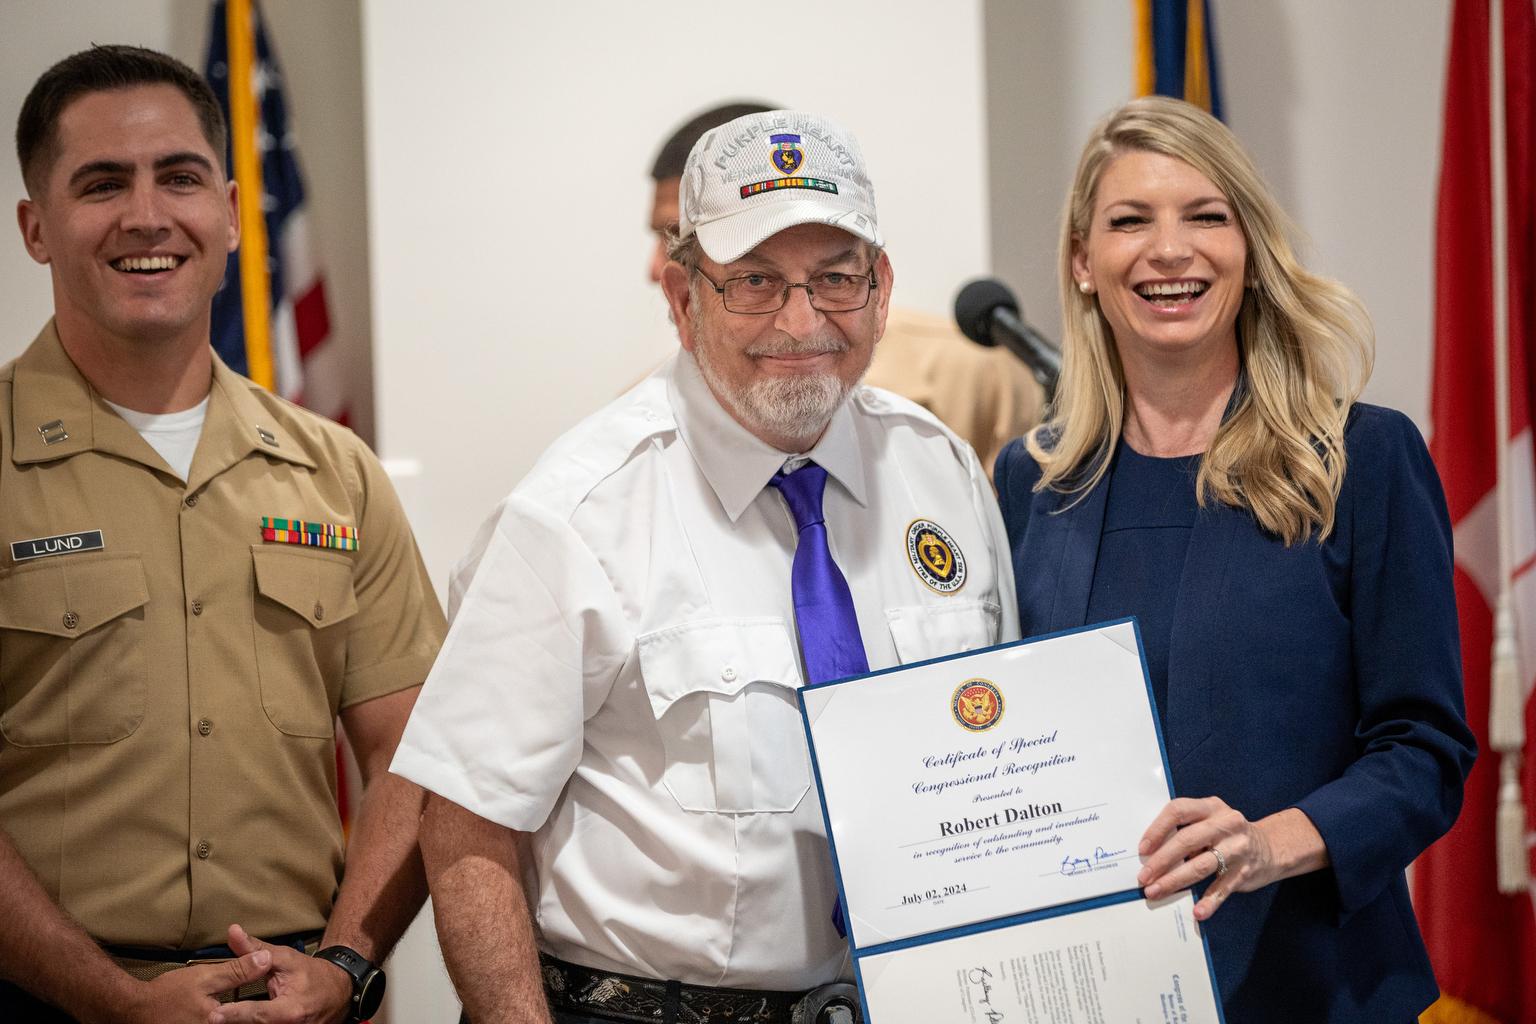 U.S. Army Vietnam Veteran Robert Dalton holds his Certificate of Special Congressional Recognition